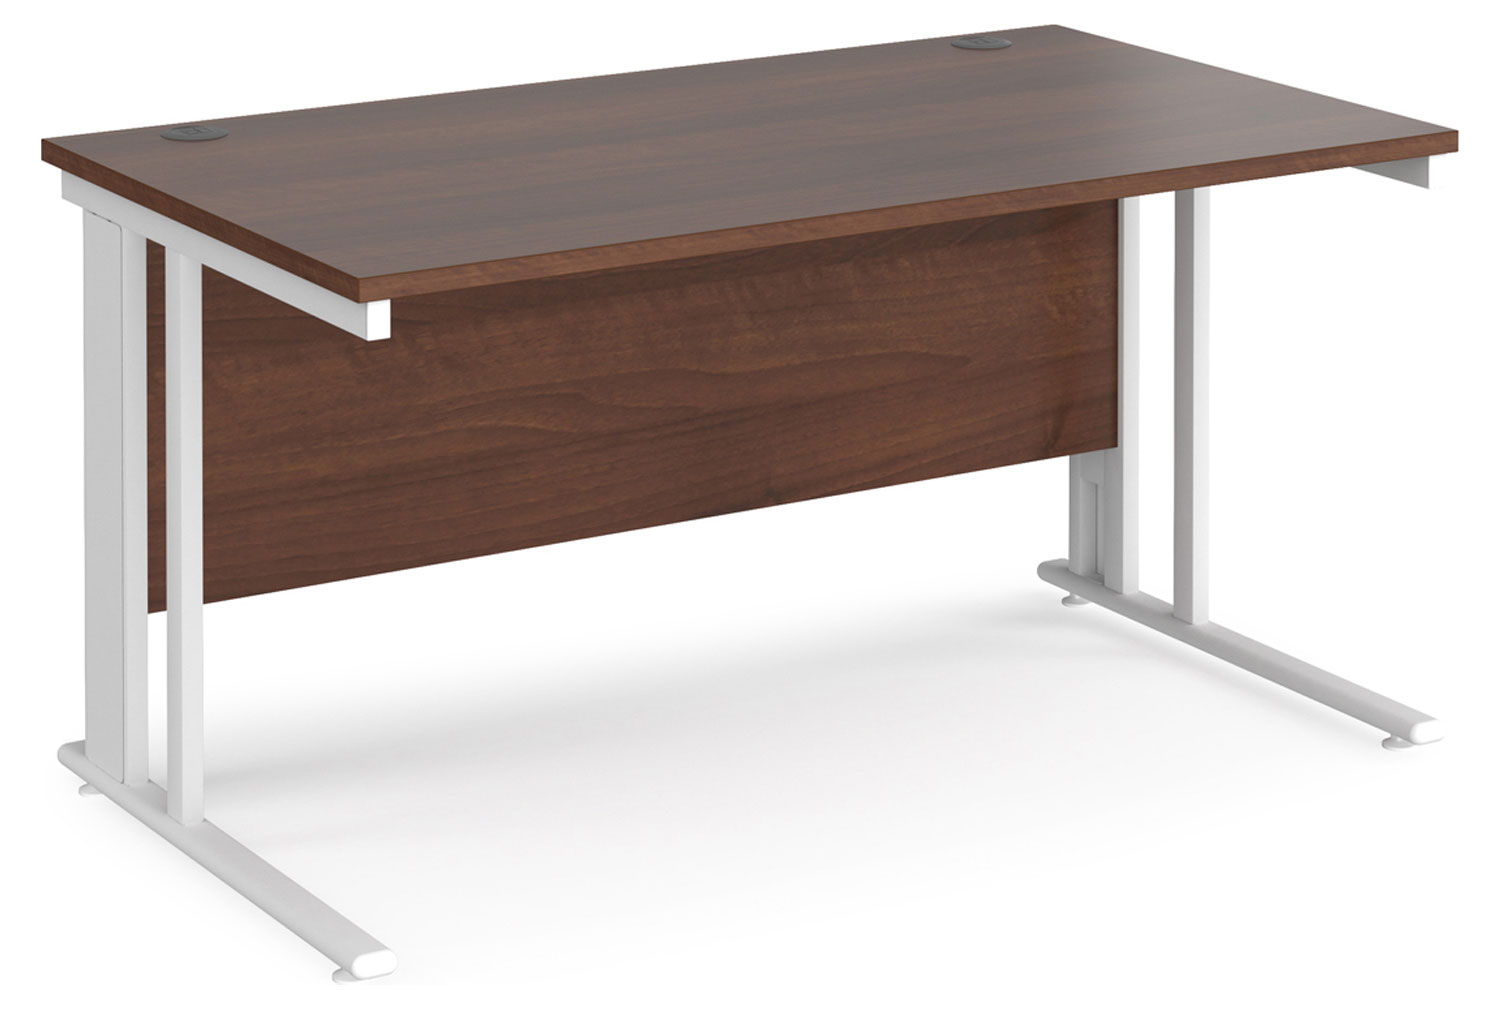 Value Line Deluxe Cable Managed Rectangular Office Desk (Silver Legs), 140wx80dx73h (cm), Walnut, Fully Installed